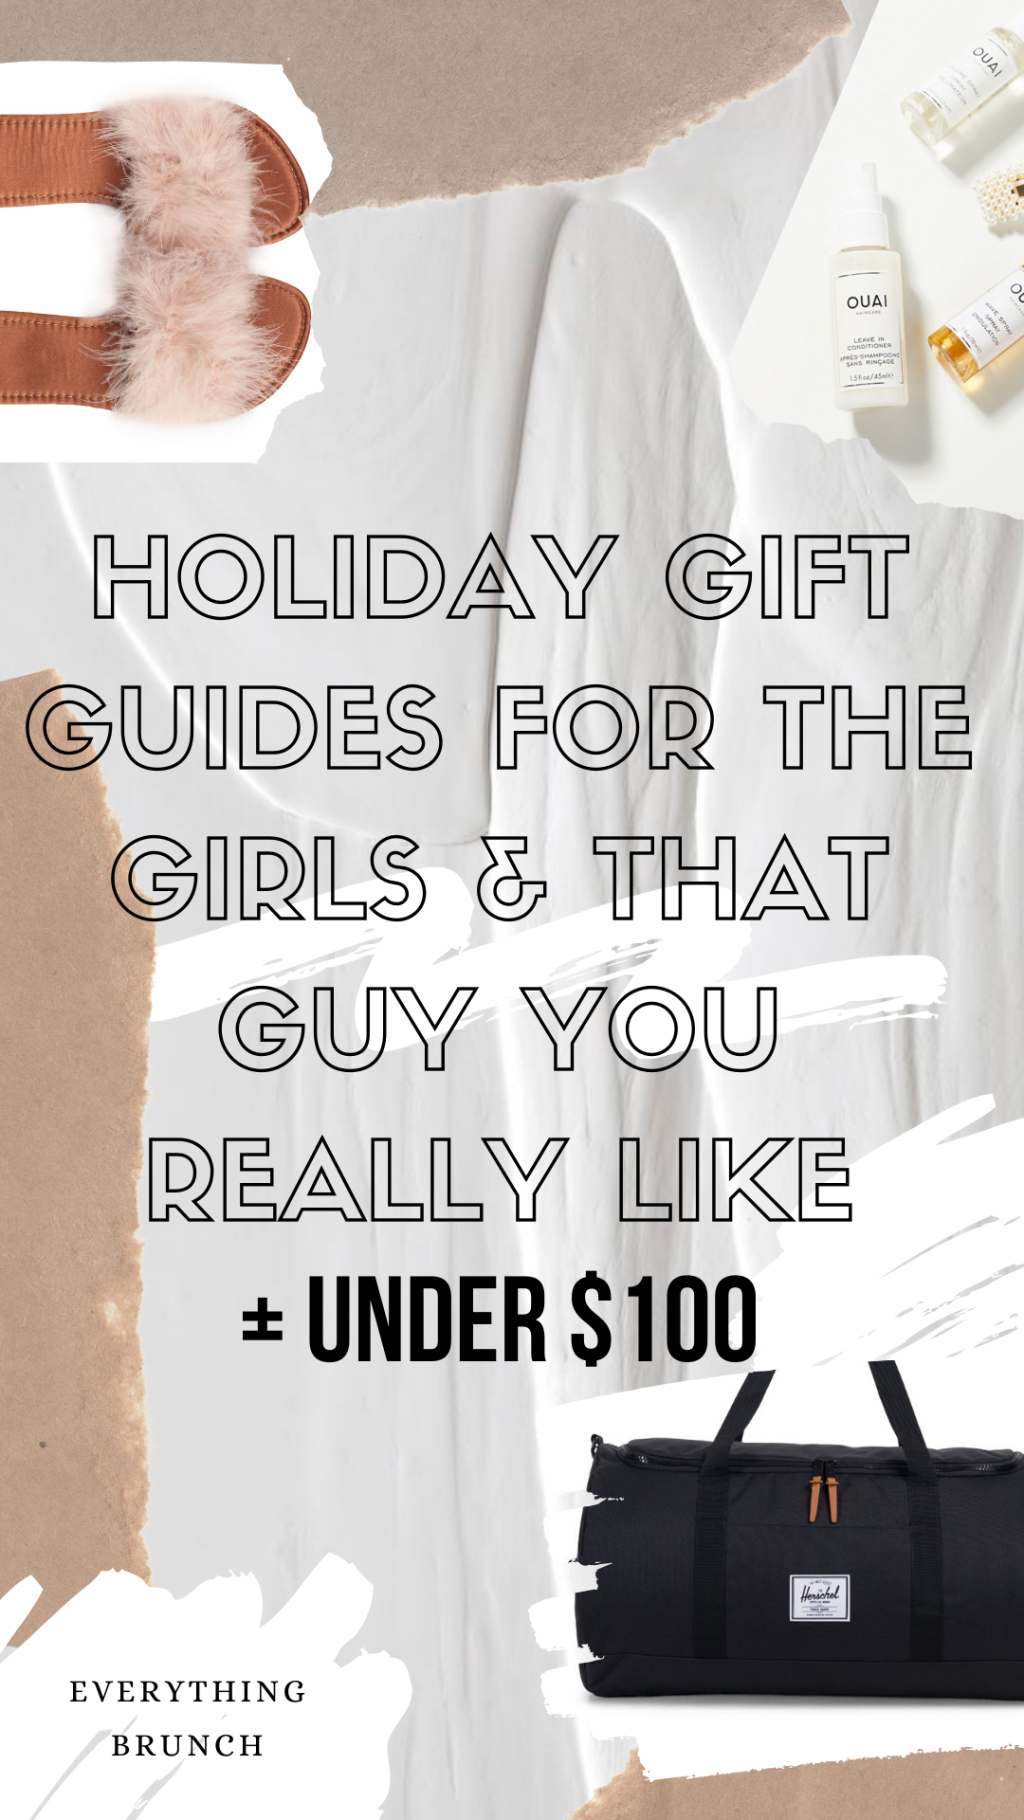 HOLIDAY GIFT GUIDES FOR THE GIRLS & THAT GUY YOU REALLY LIKE + UNDER $100